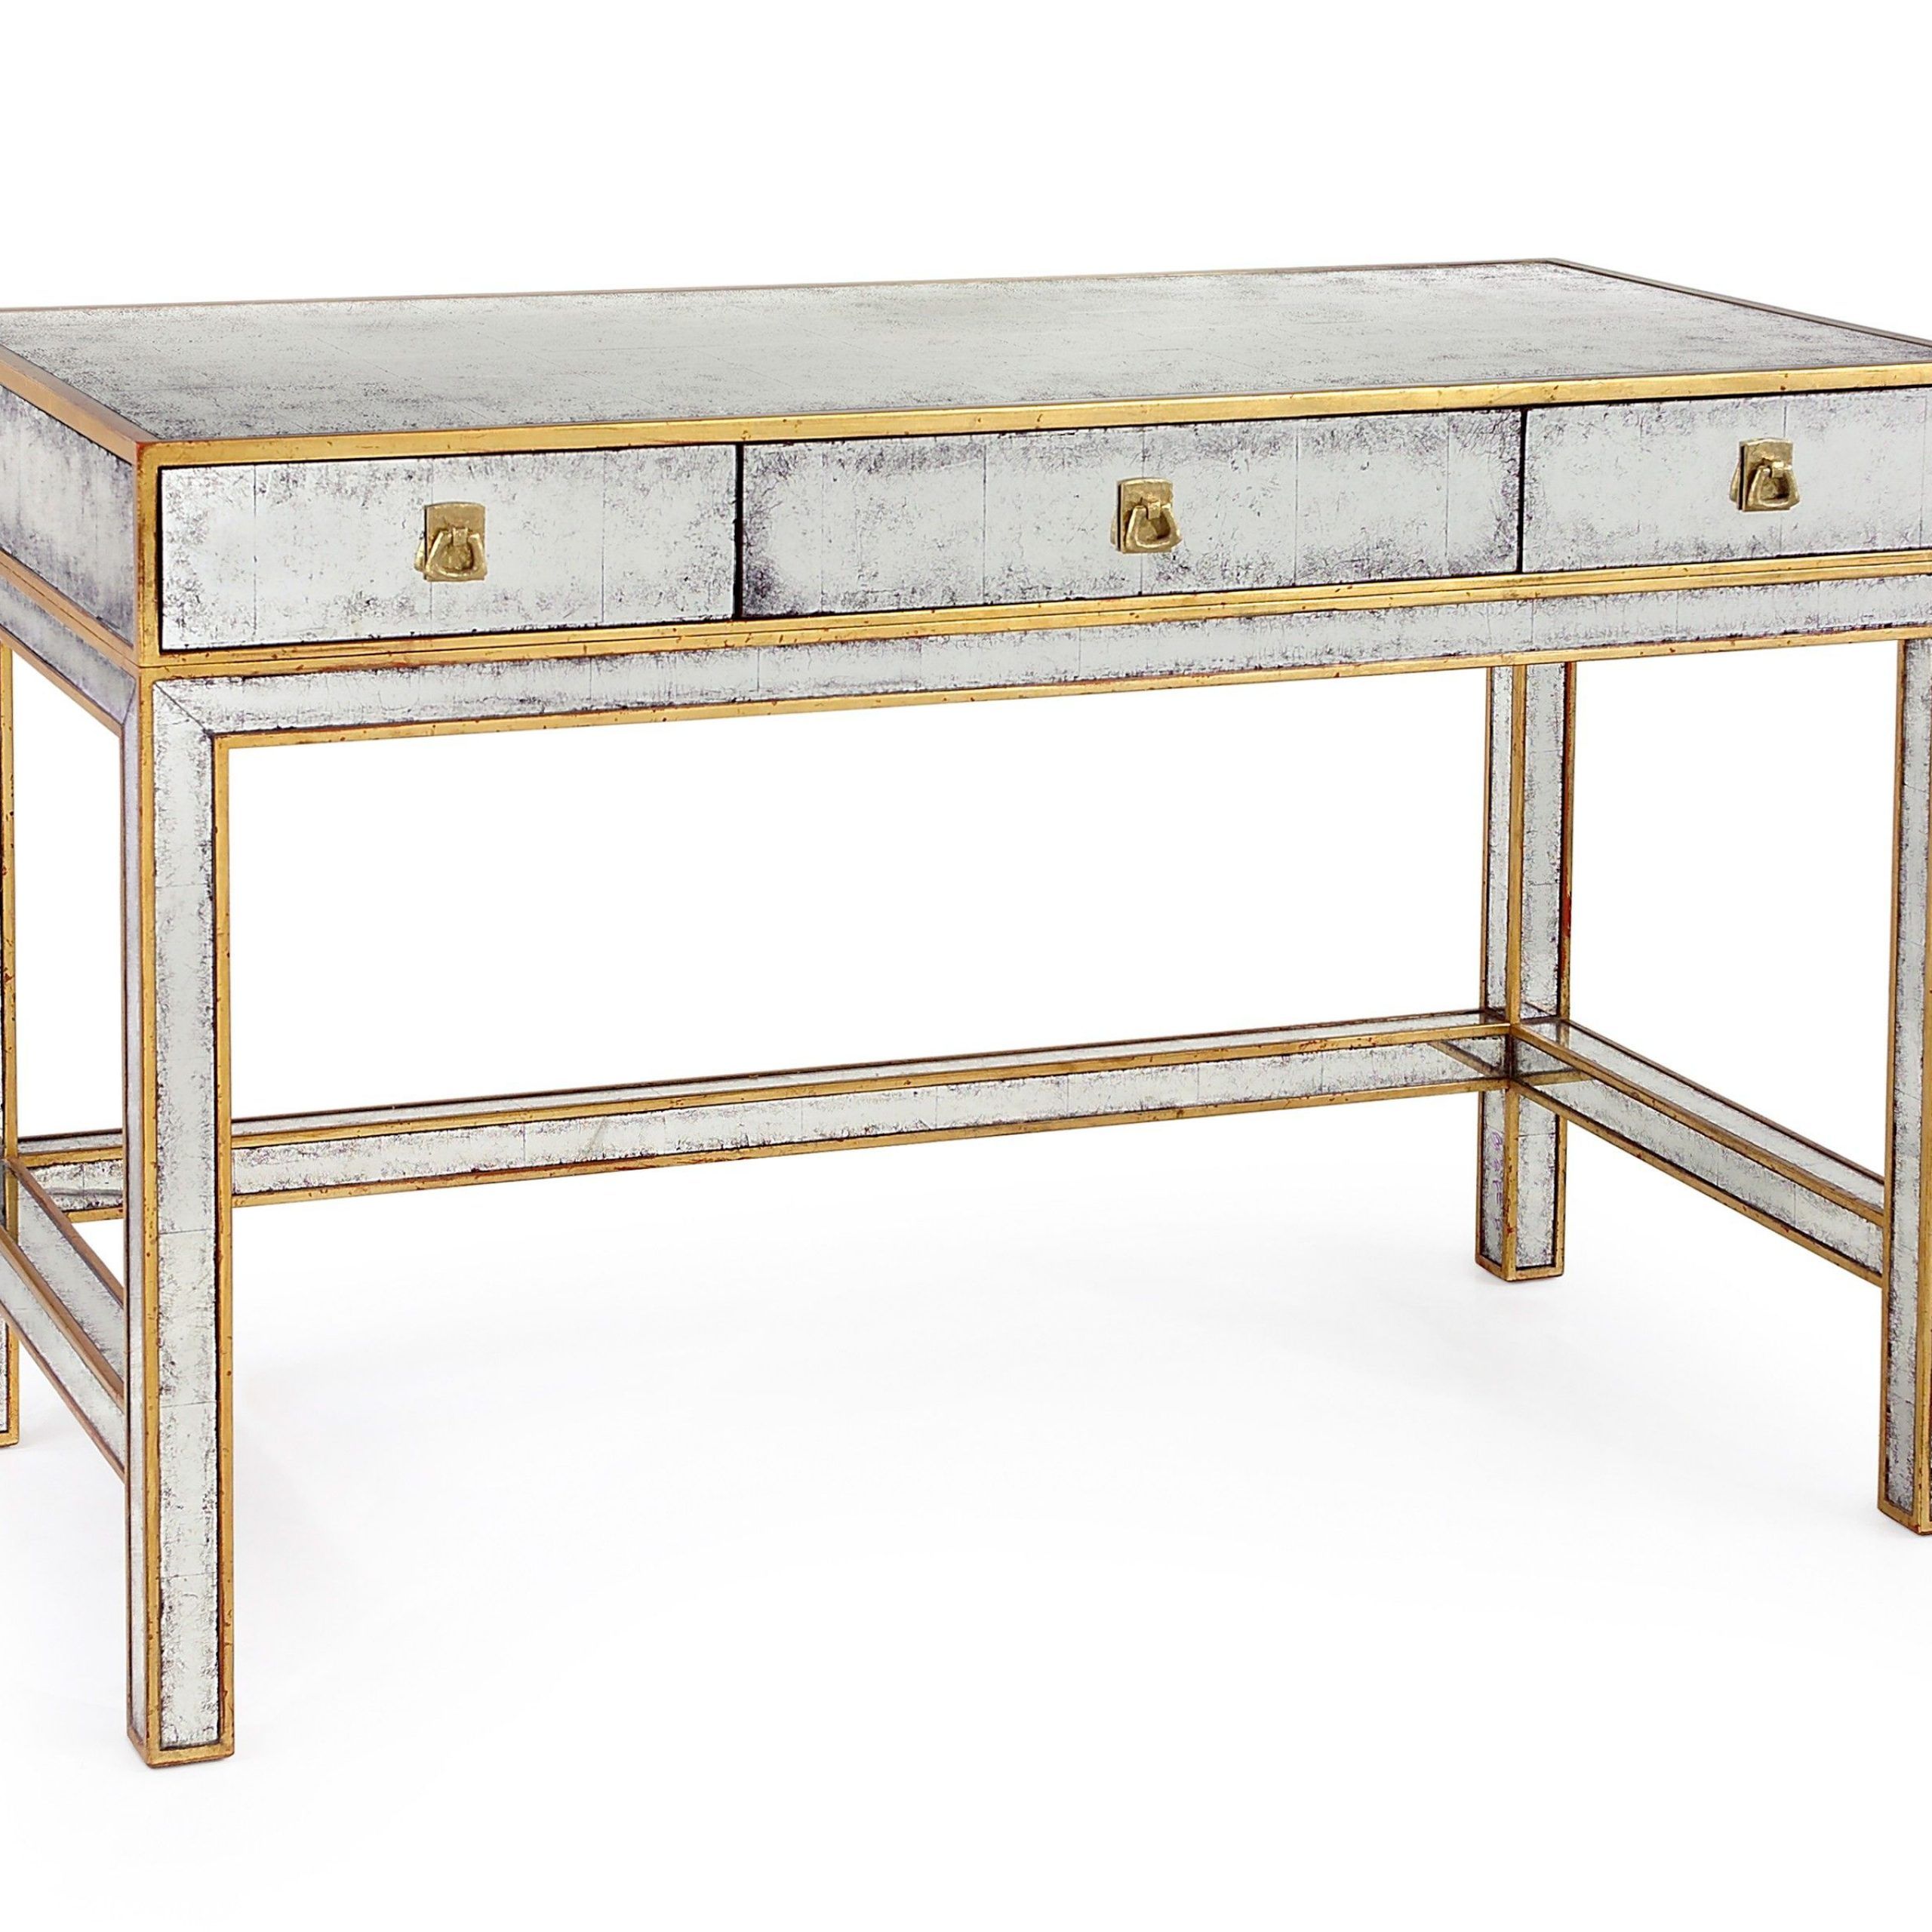 Three Drawer Writing Desk With Eglomise And Gold Leaf | Writing Table Inside Gold And Wood Glam Modern Writing Desks (View 5 of 15)